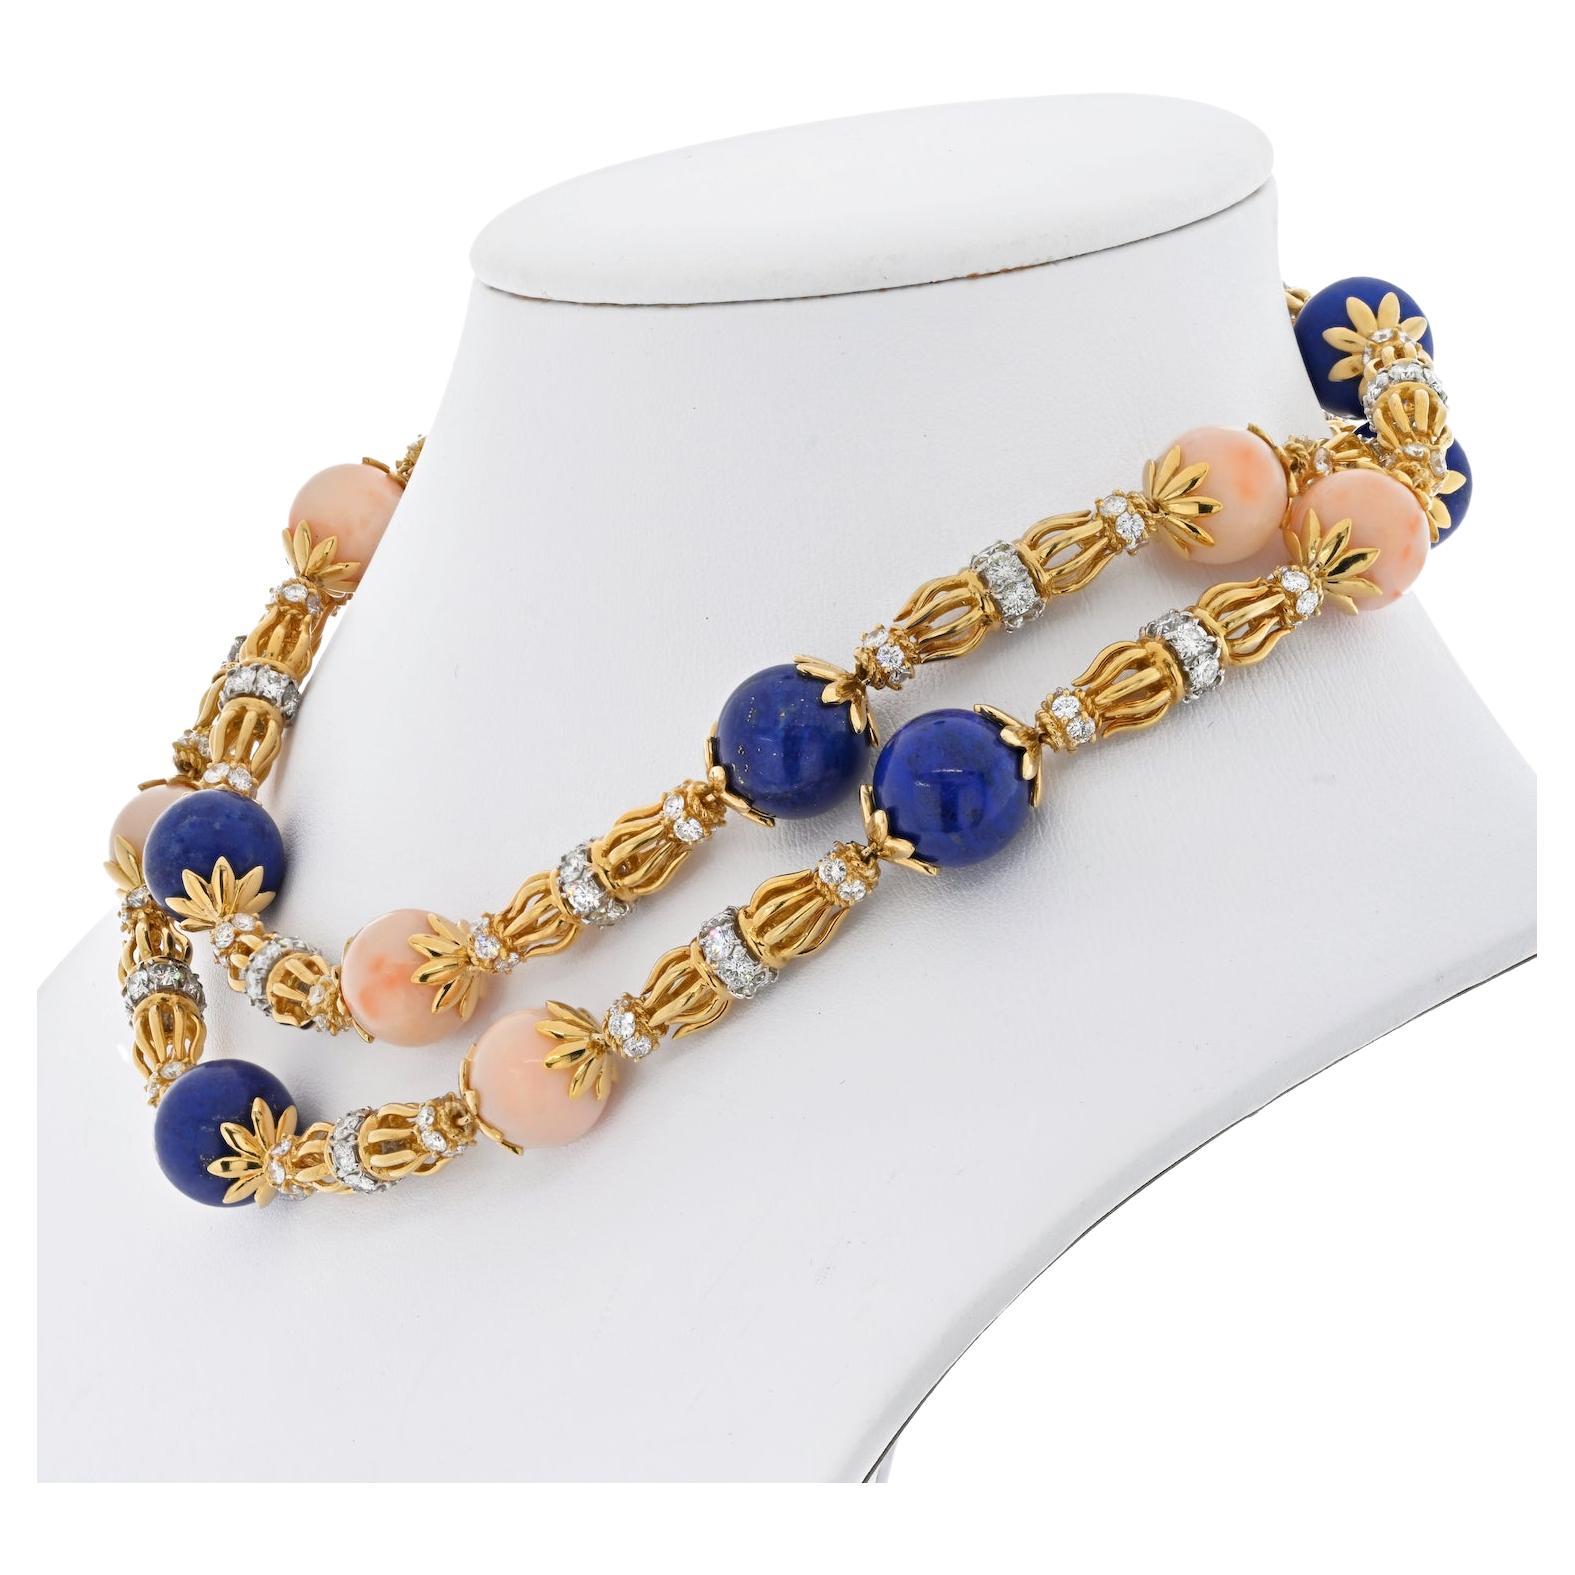 Gorgeous strand necklace: Tiffany & Co. Jean Schlumberger One Long Strand Lapis Coral And Diamond Necklace. Made in 18k yellow gold and diamonds are set in platinum. A rare jewel item that you won't see around.

Excellent condition. The articulated